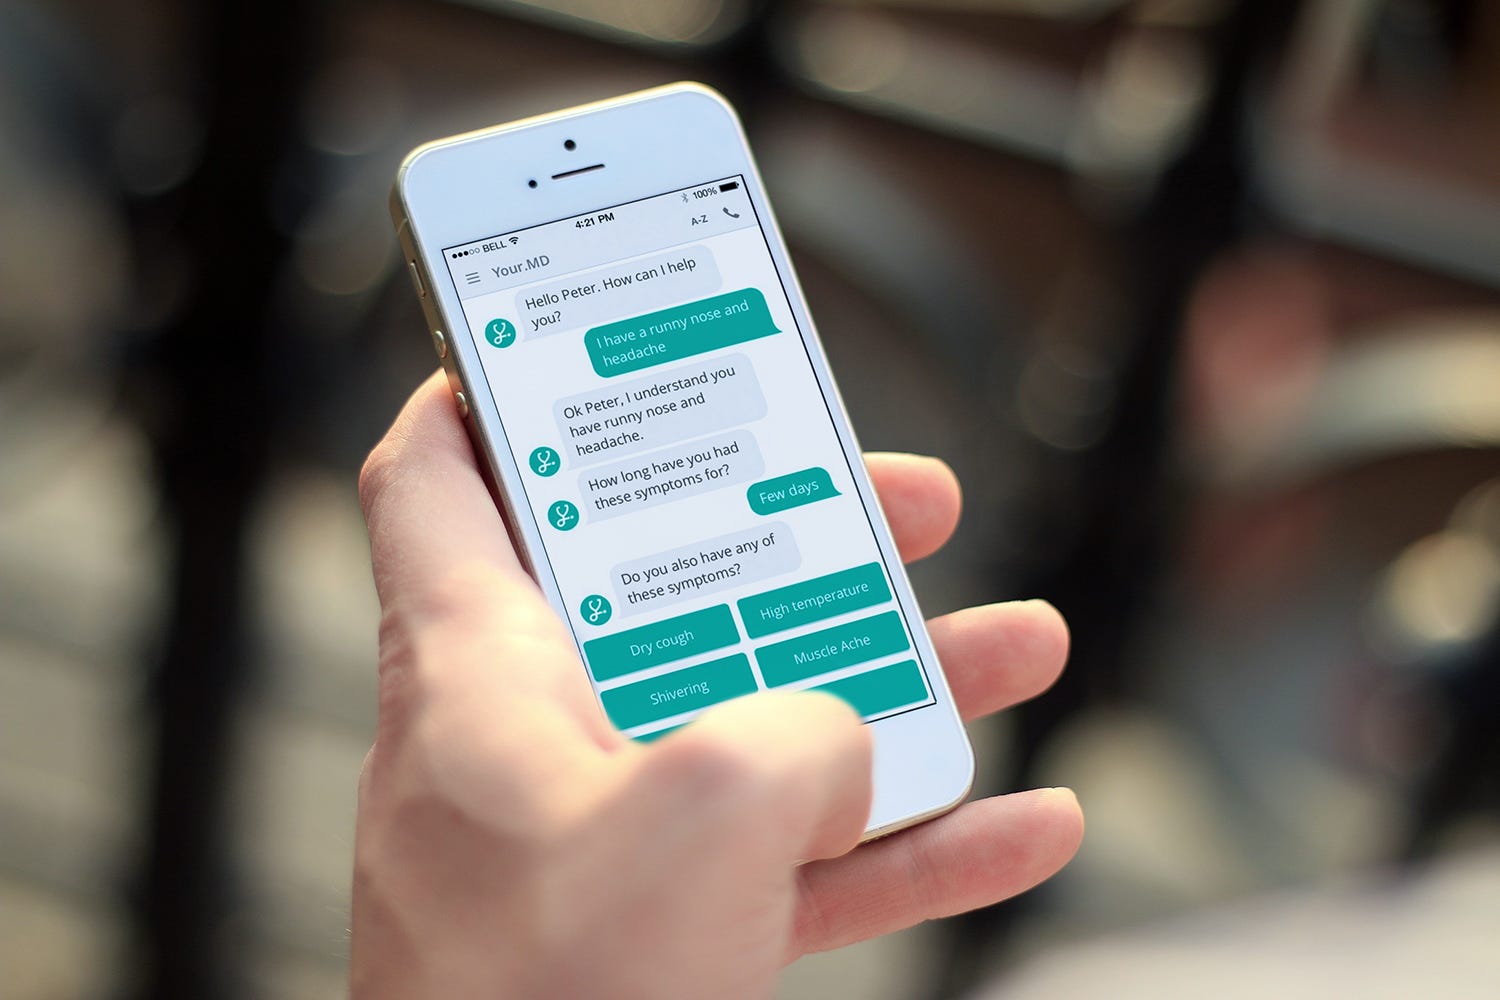 Top Useful Chatbots for Health. Medical chatbots offer advice… | by